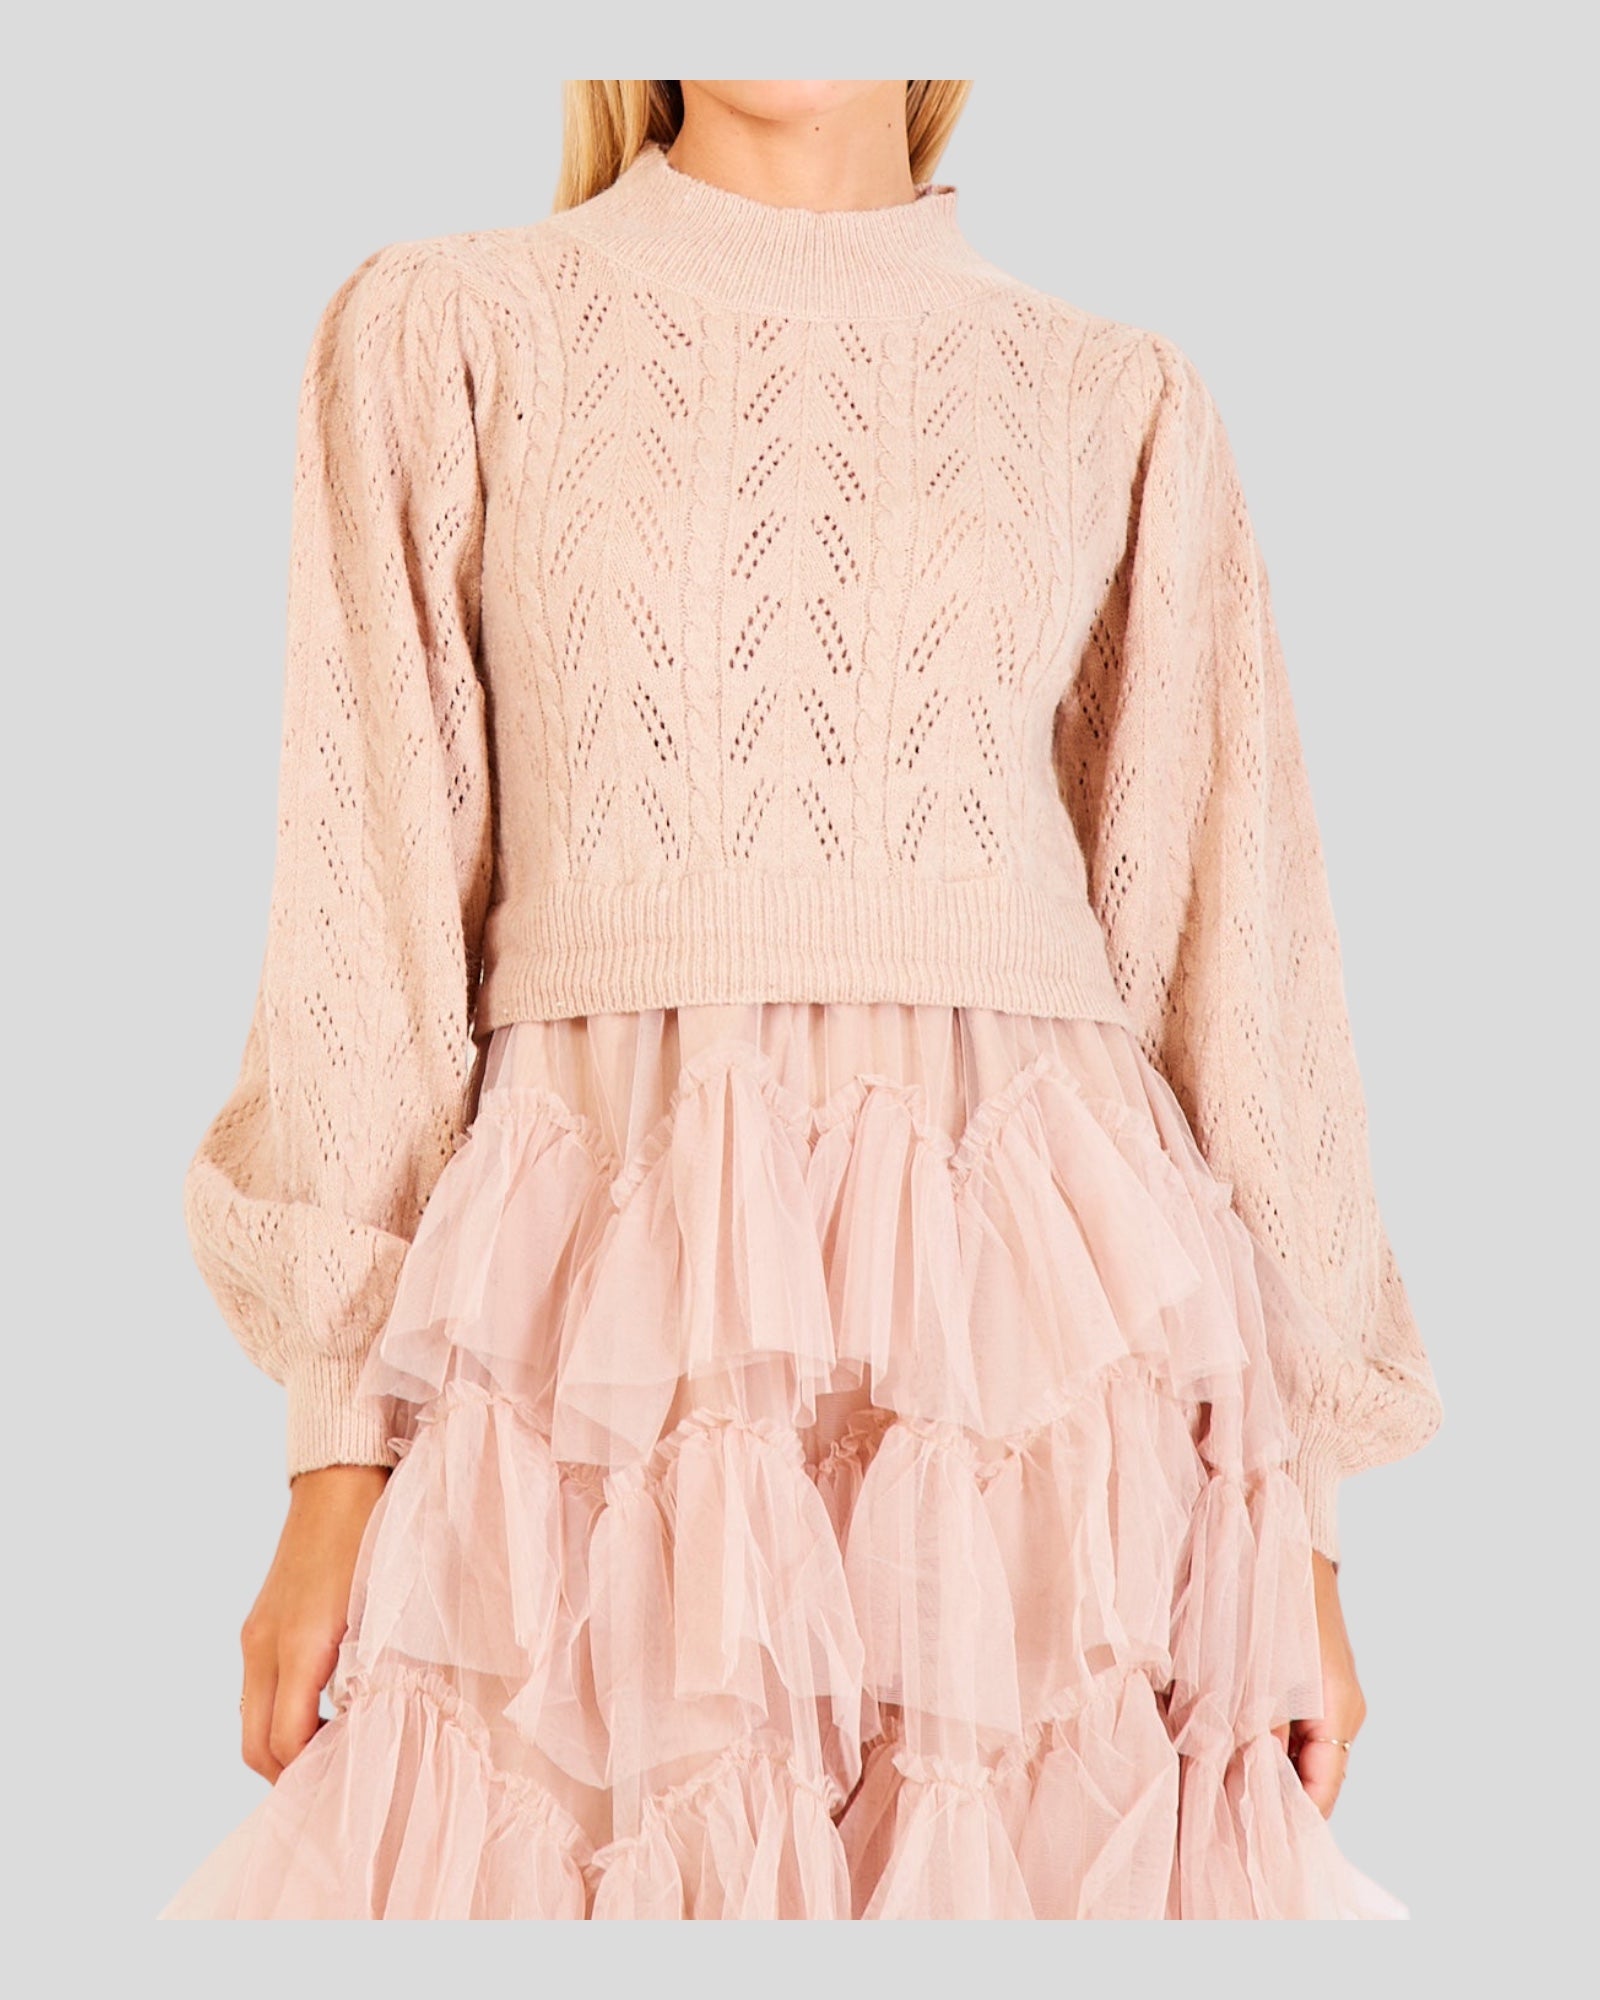 Women's Sweater in a delightful beige/baby pink hue. The design combines the sophistication of a knitted sweater on the upper part with playful tulle ball dress ruffles adorning the skirt. Evoking the iconic "Sex and the City" style, this fashion-forward piece seamlessly blends comfort and elegance